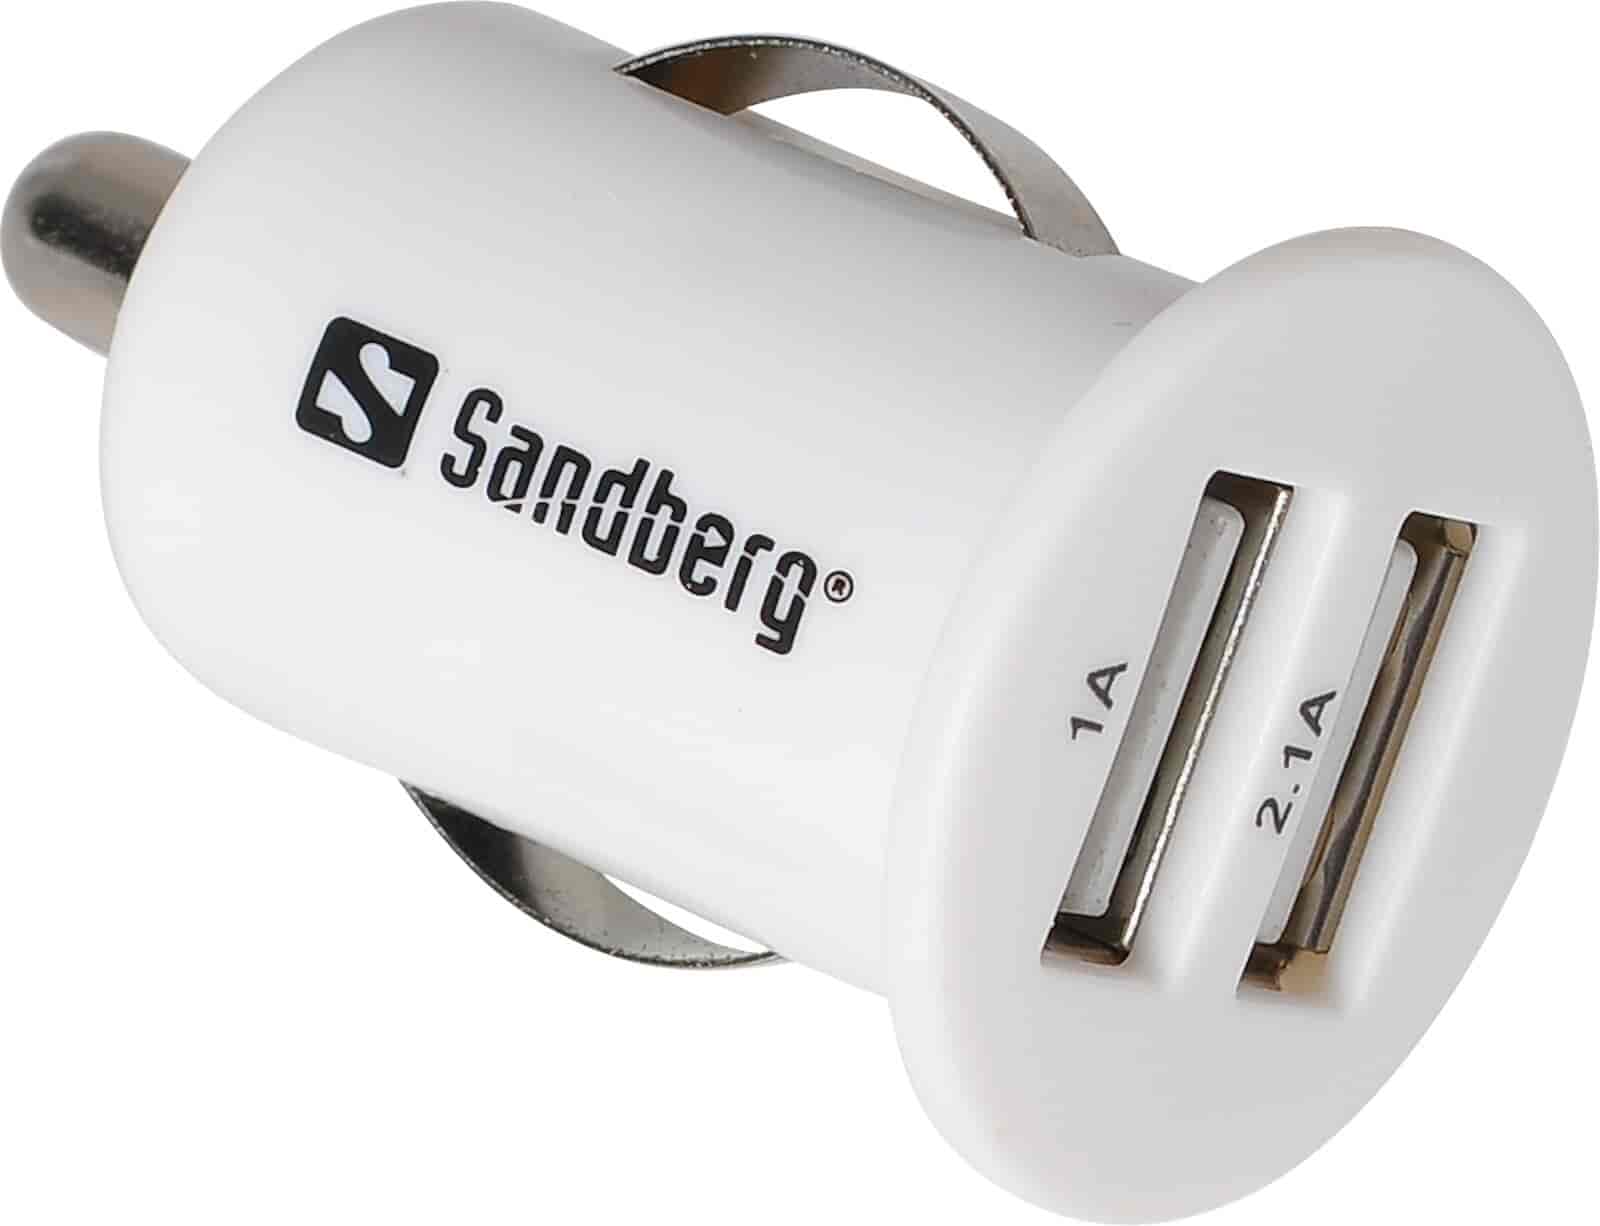 Sandberg Mini Car Charger 2xUSB 1A+2.1AWith the Sandberg Car charger 2 x USB, you’ll always have a USB port to hand in your car, whether it’s your iPad, iPhone, iPod or another USB device that’s running low on power.Sandberg